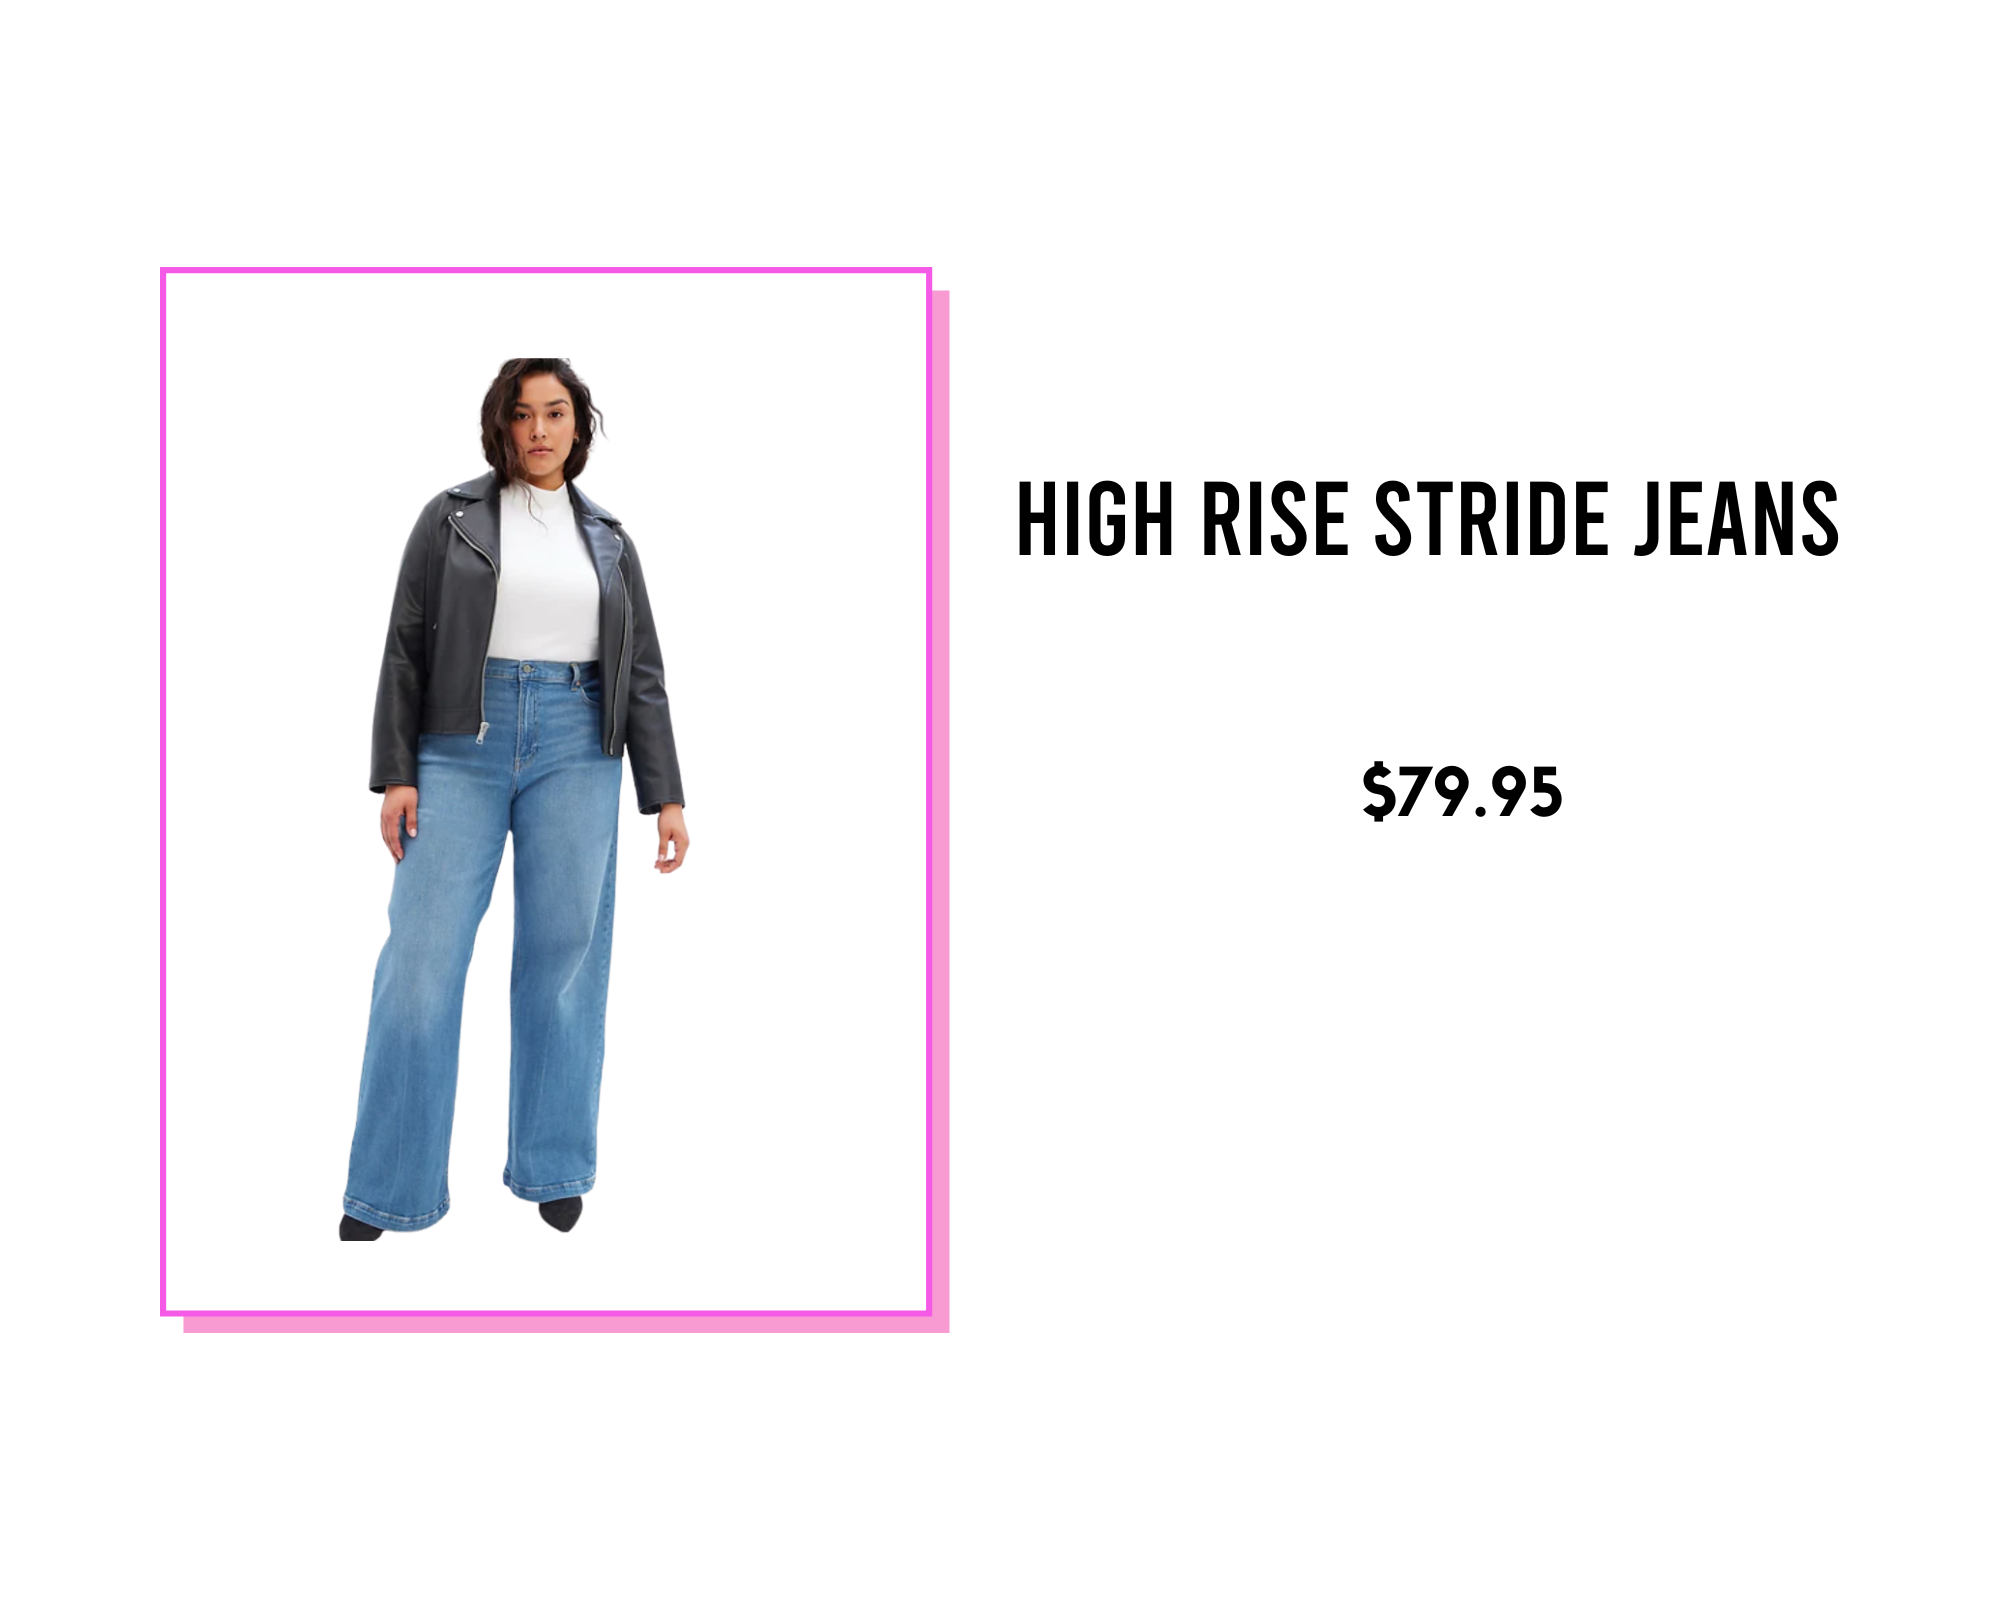 Guys, here's the jeans that fit your thick & athletic thighs — Let's Get You